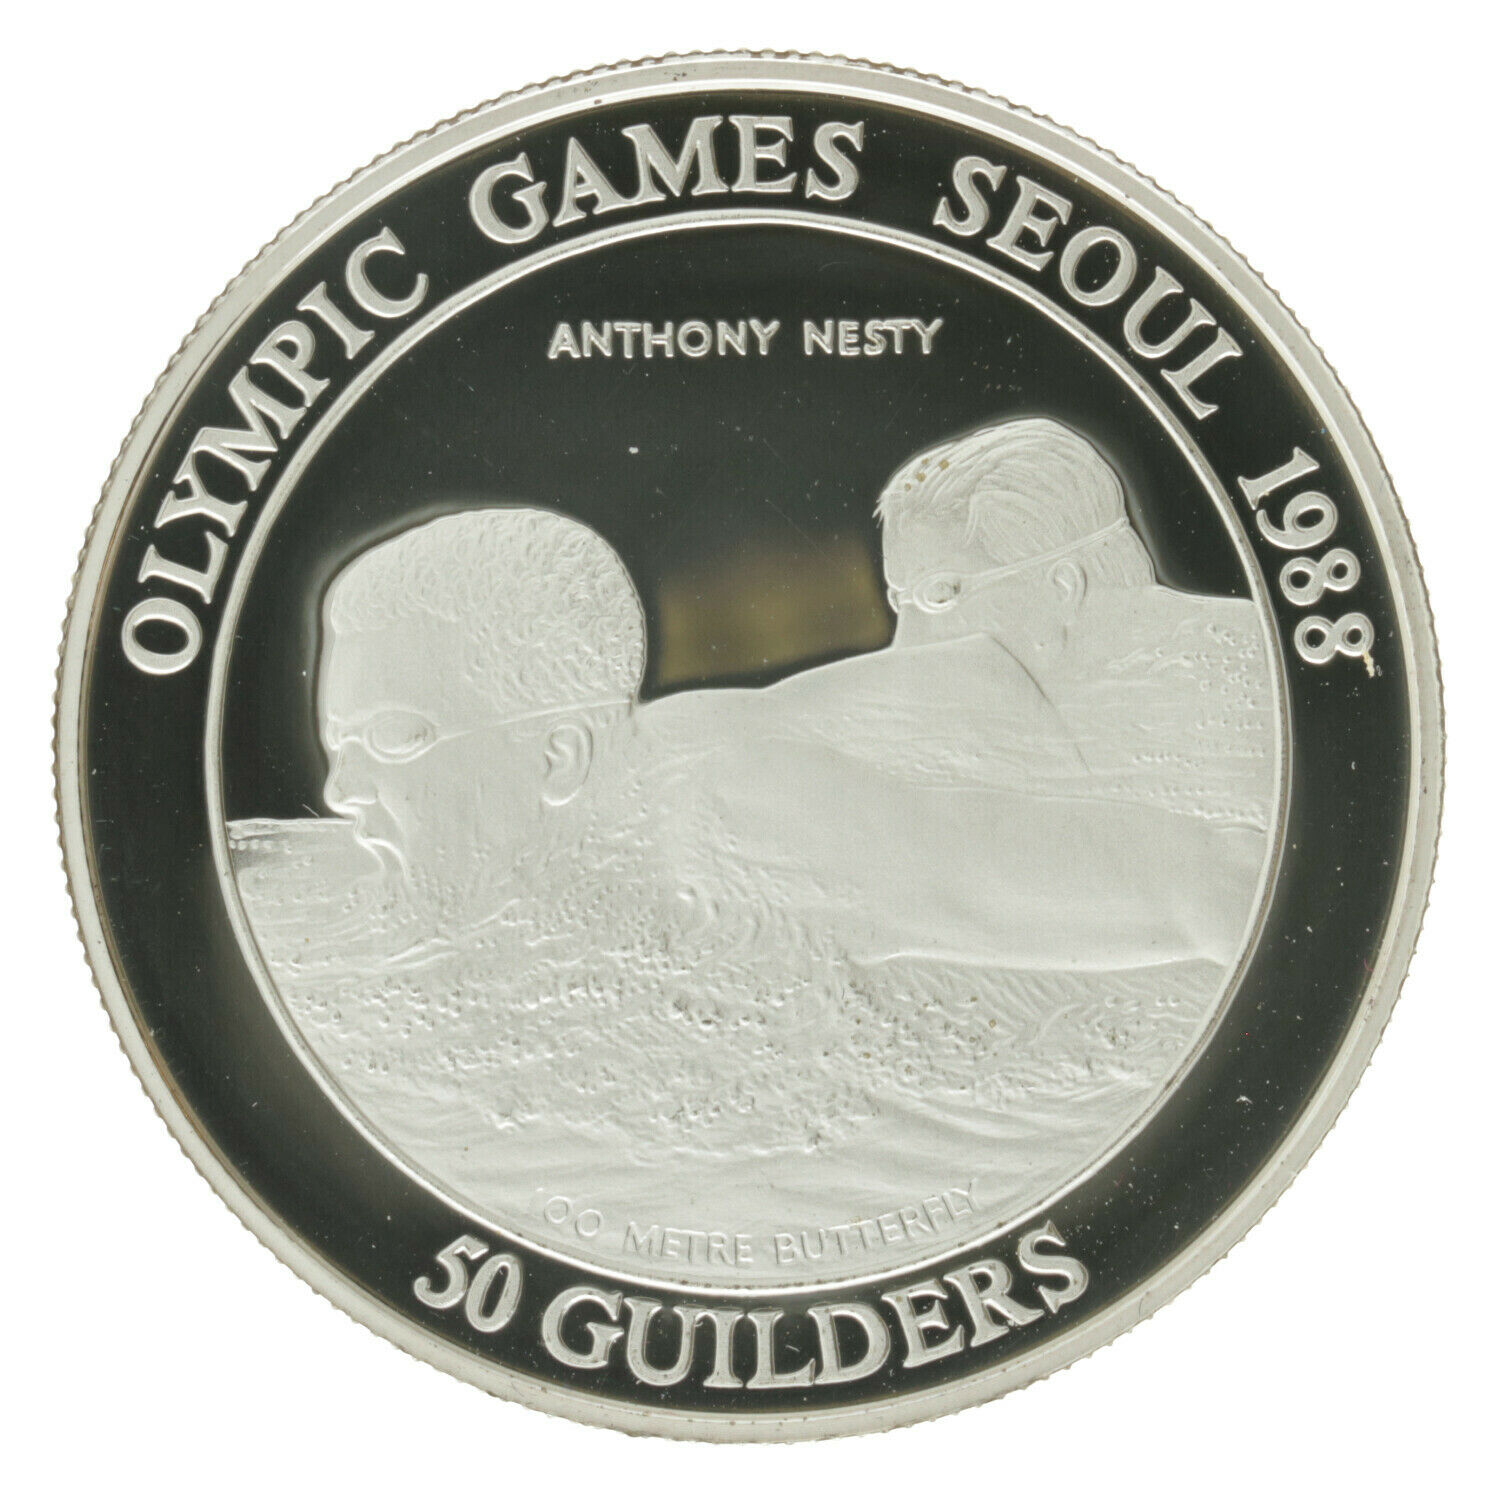 Suriname - Silver 50 Guilders Coin - 'Anthony Nesty' - 1988 - Proof